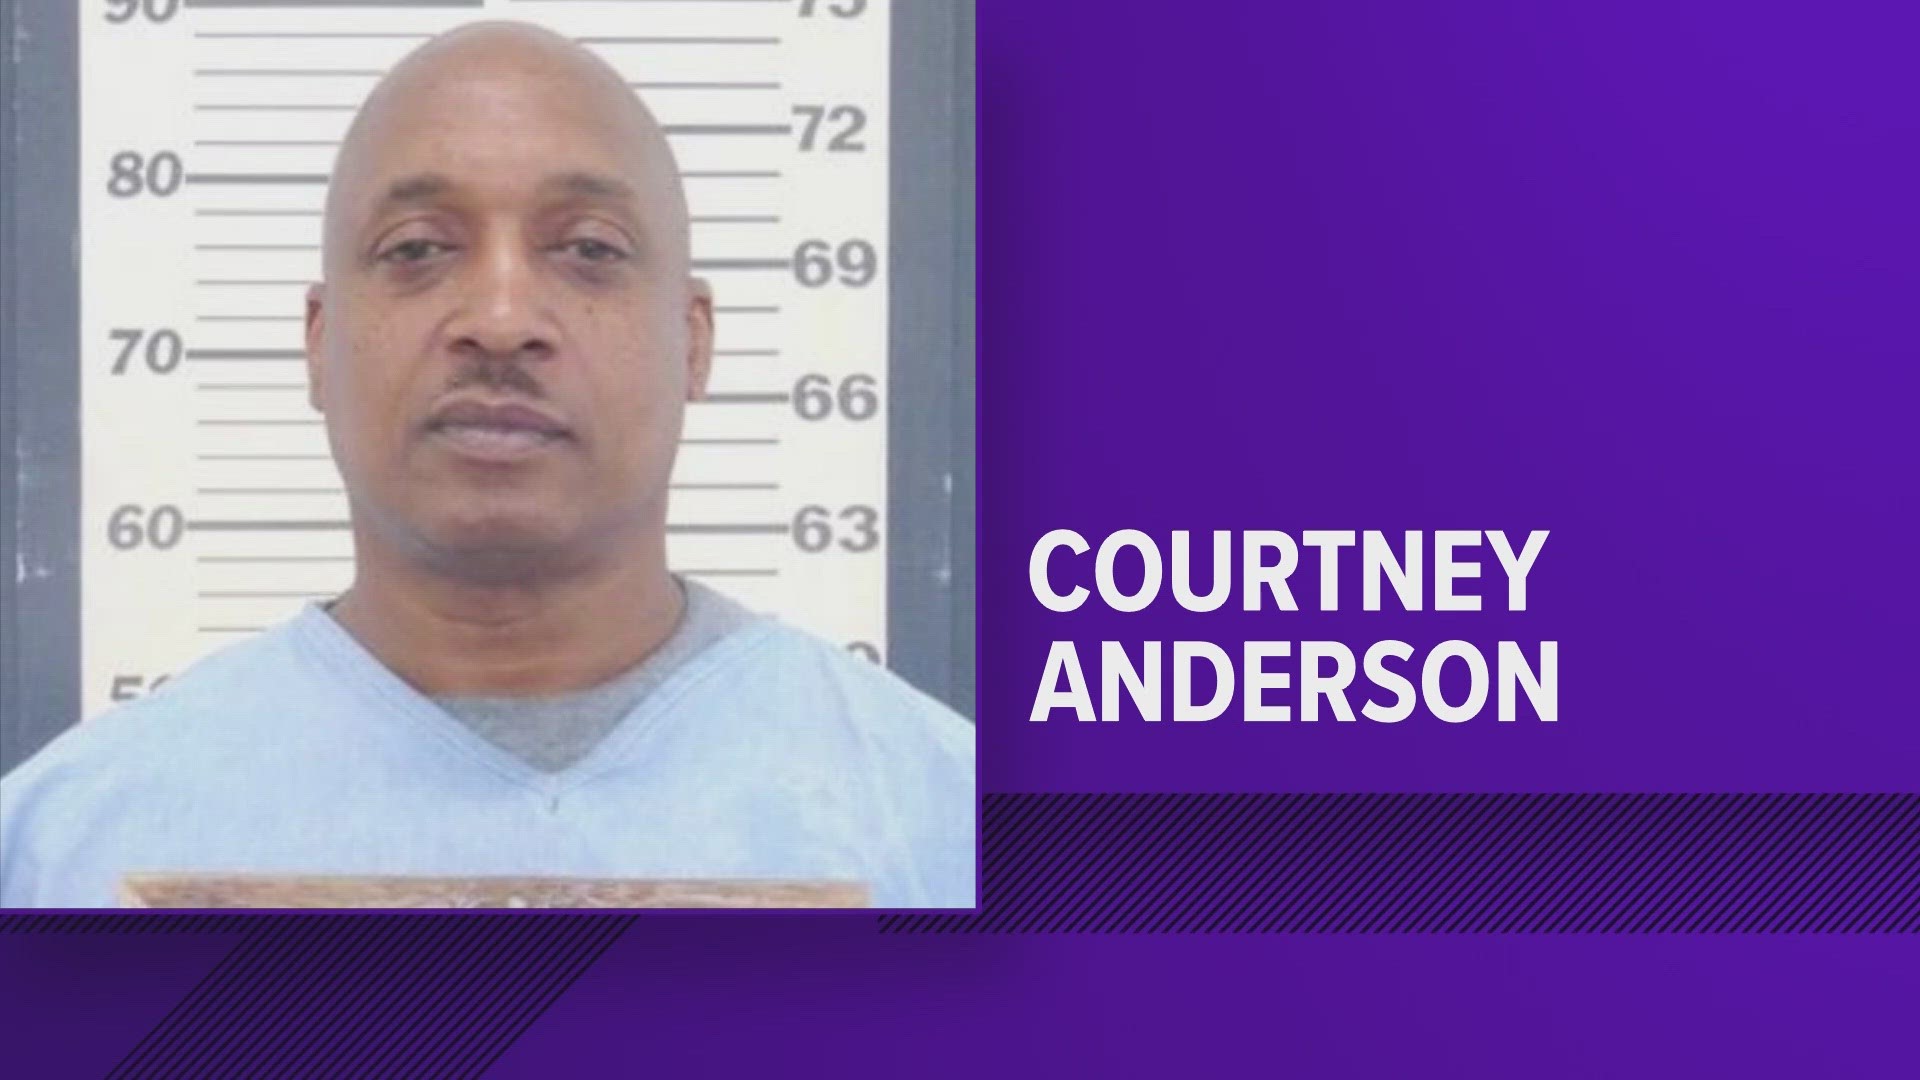 Courtney Anderson, now 55, was arrested in 1997 and later convicted of multiple counts of theft and forgery. His sentence was commuted in 2022.